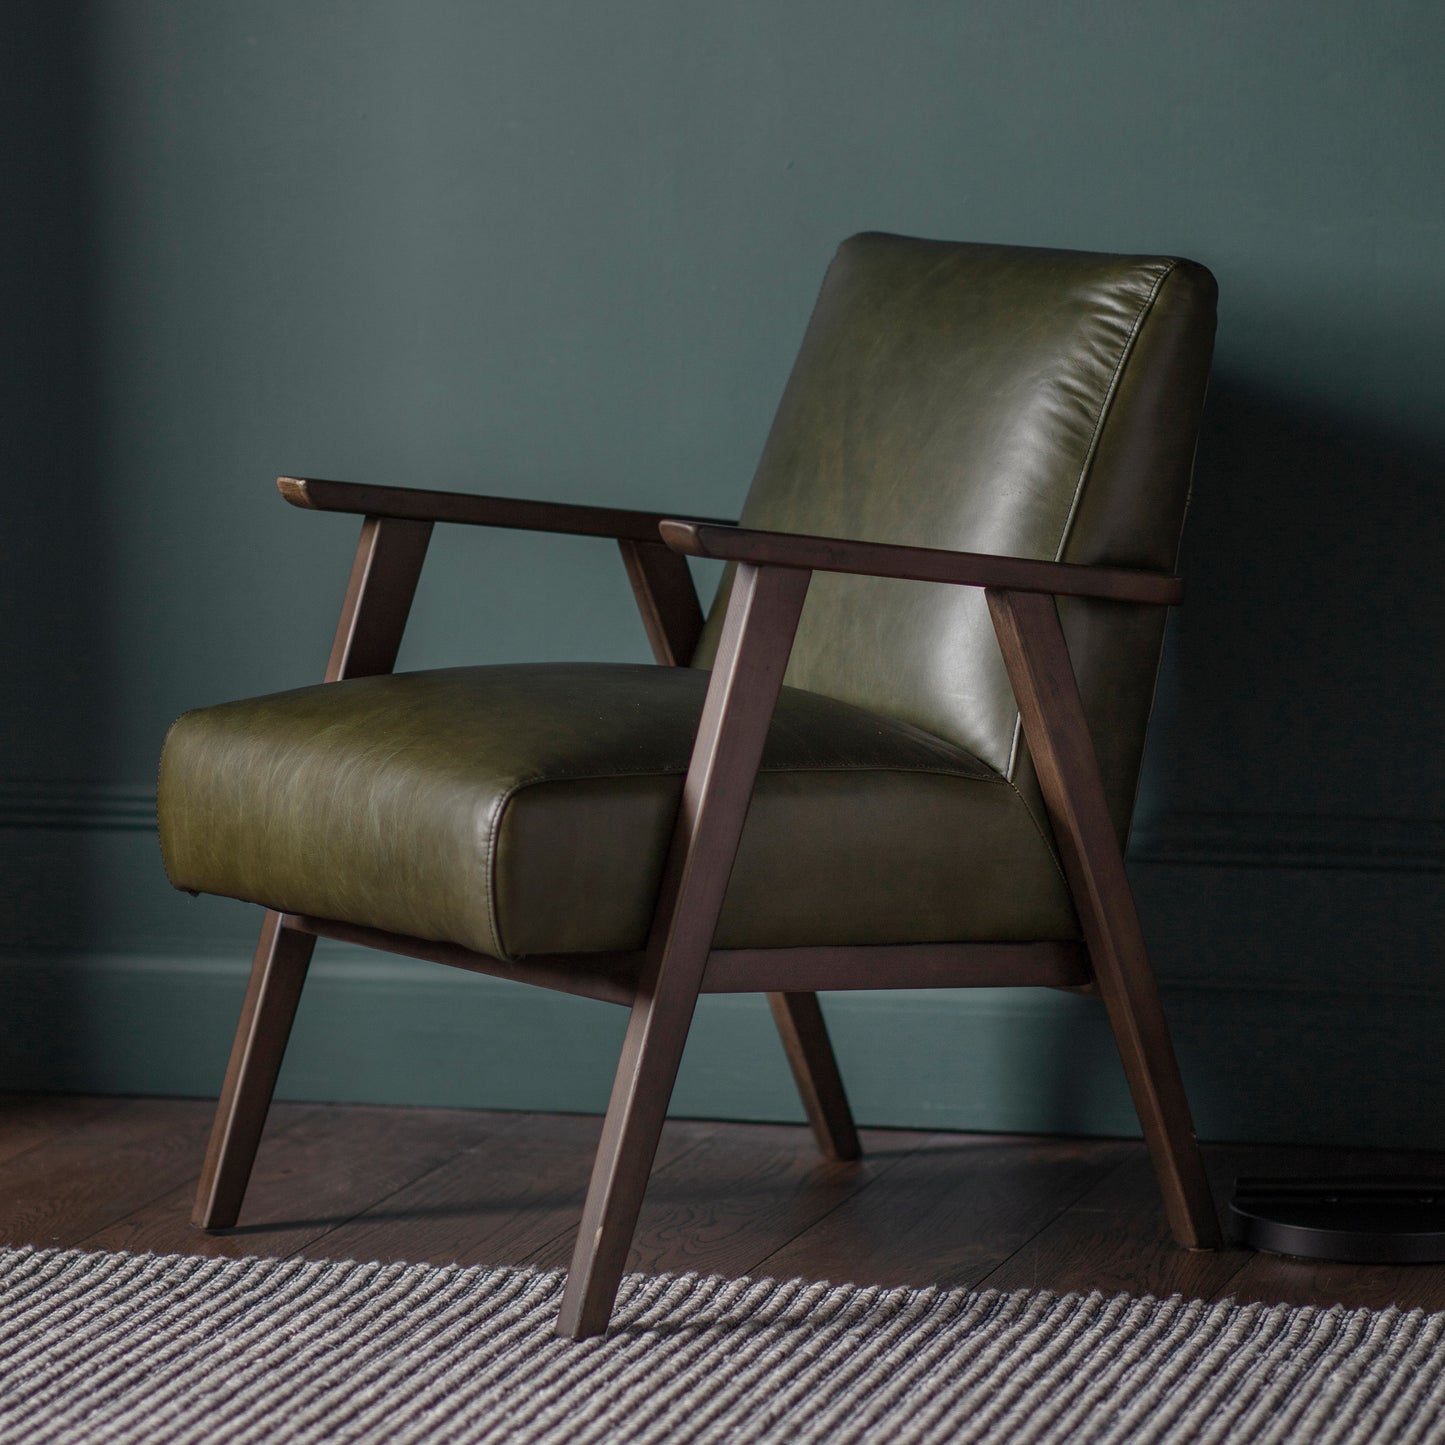 A Neyland Armchair in front of a green wall, perfect for interior decor.